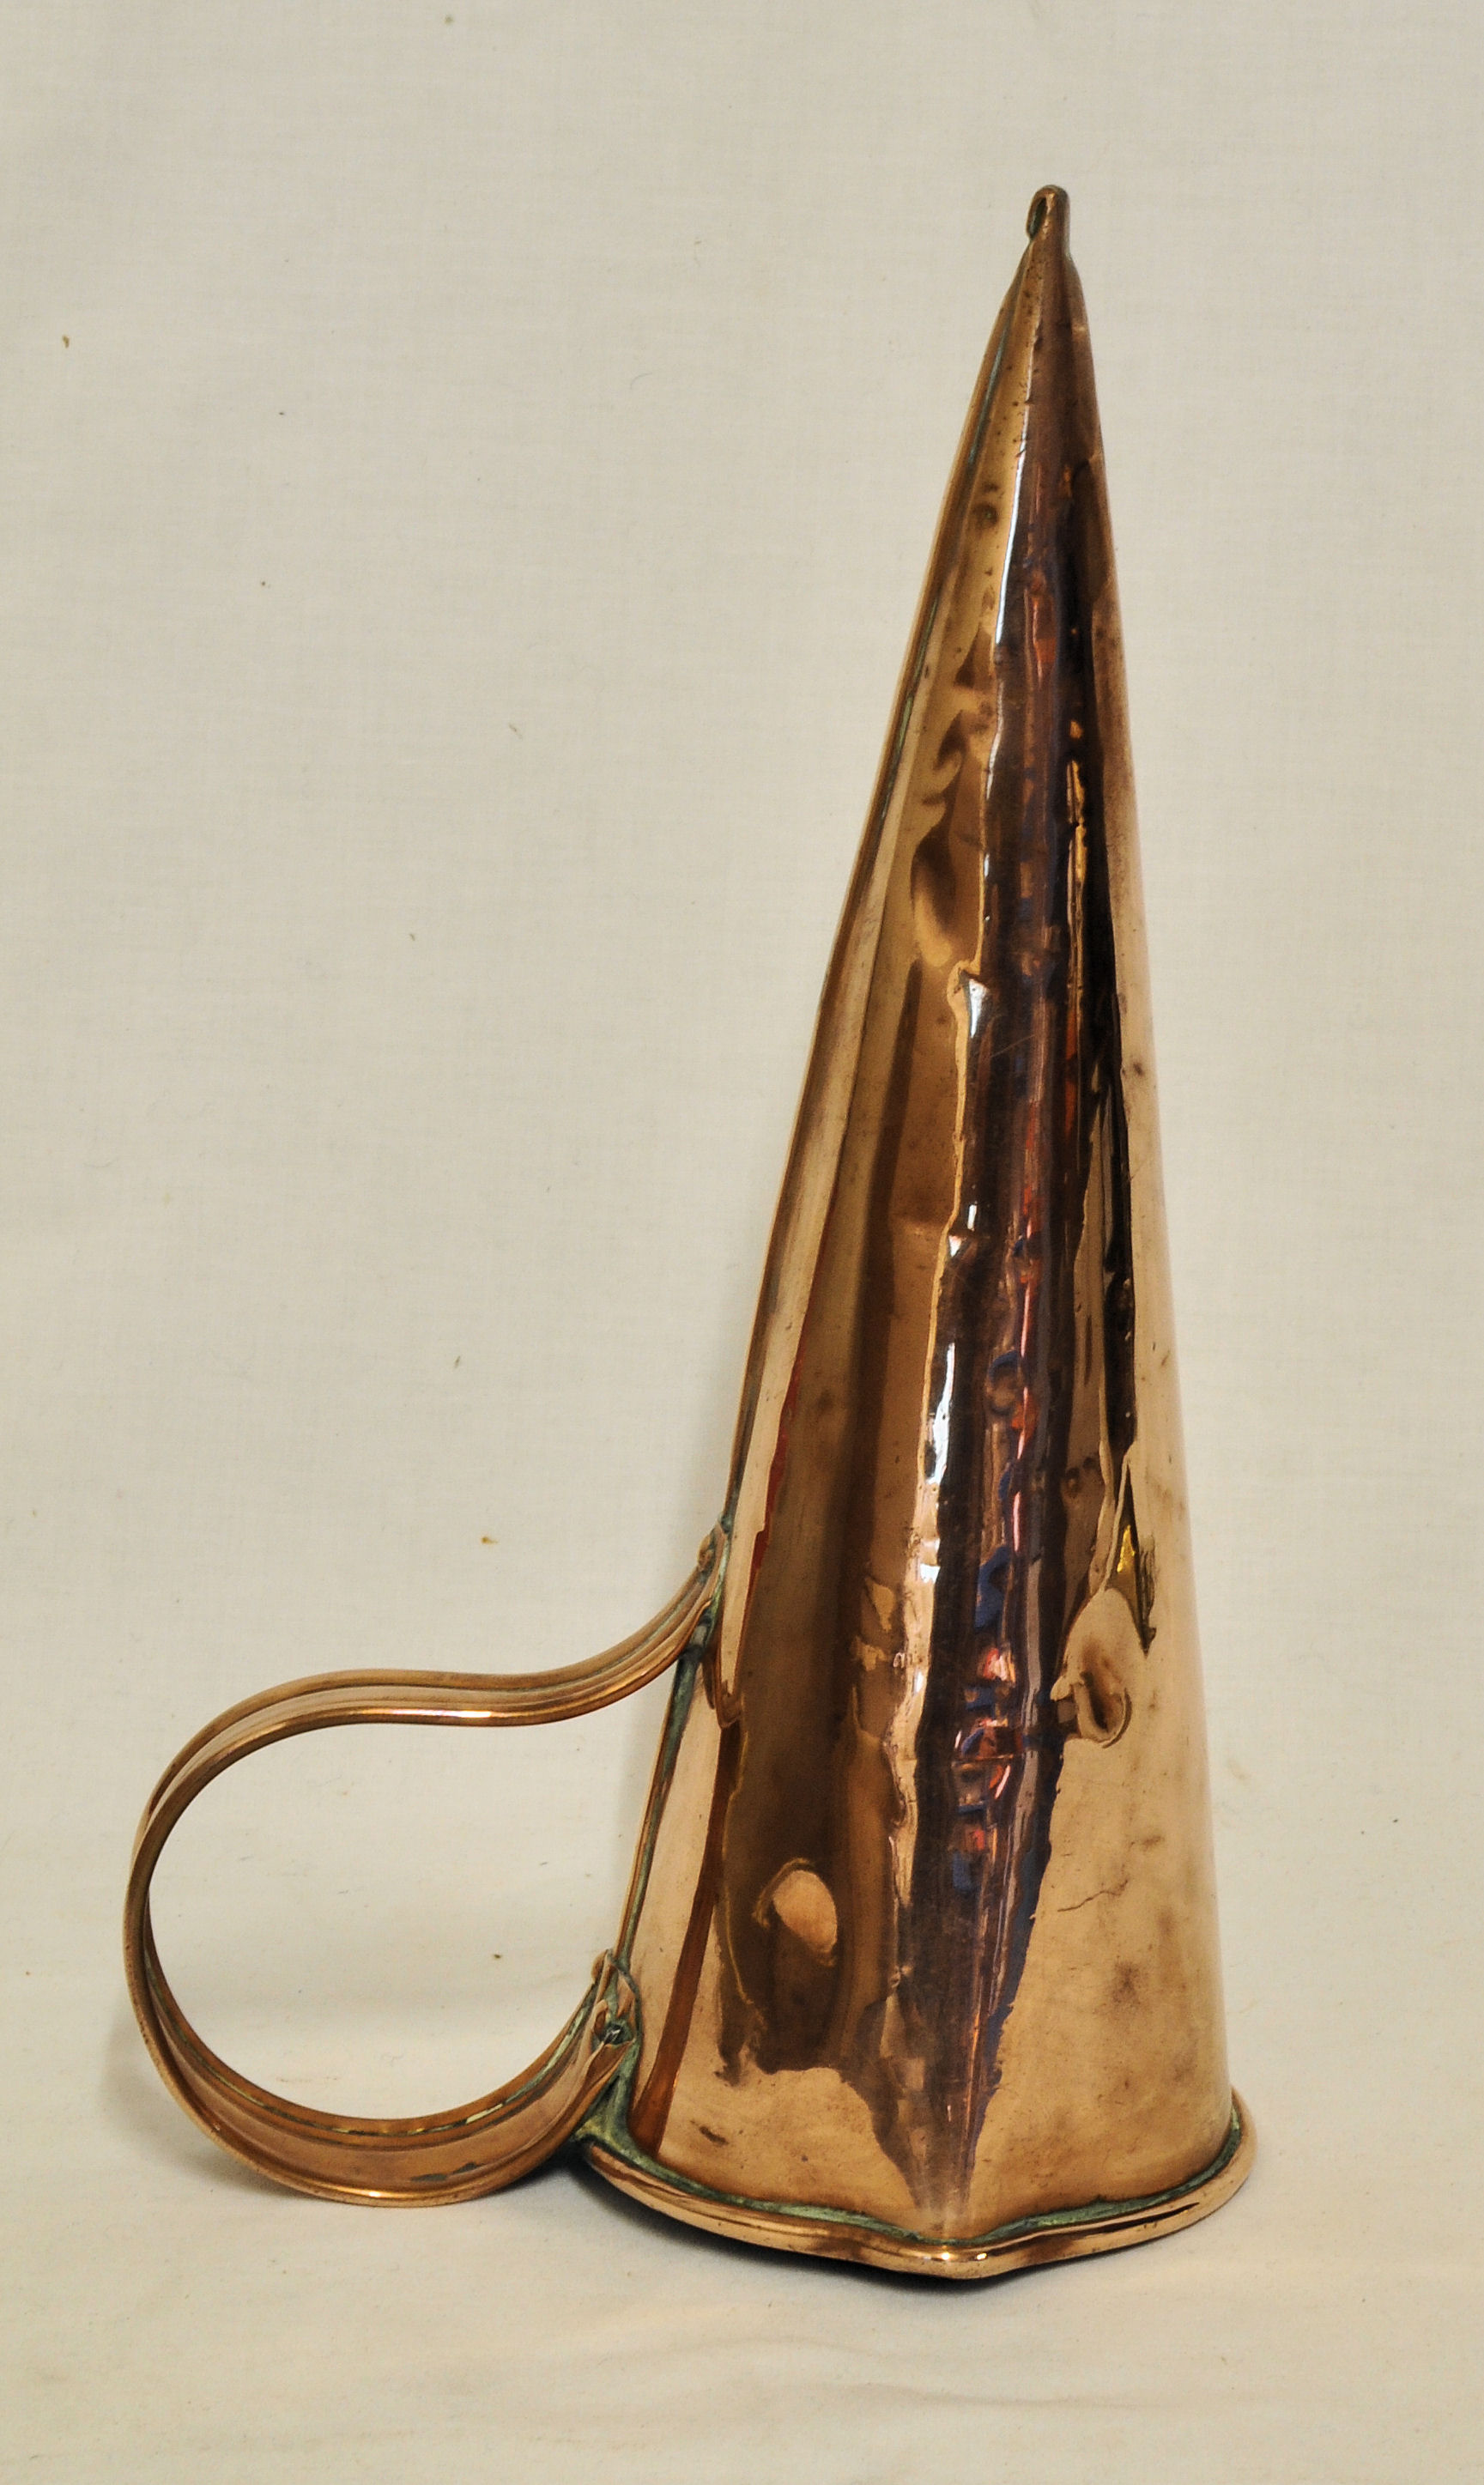 A 19th Century copper Ale Muller with loop handle.